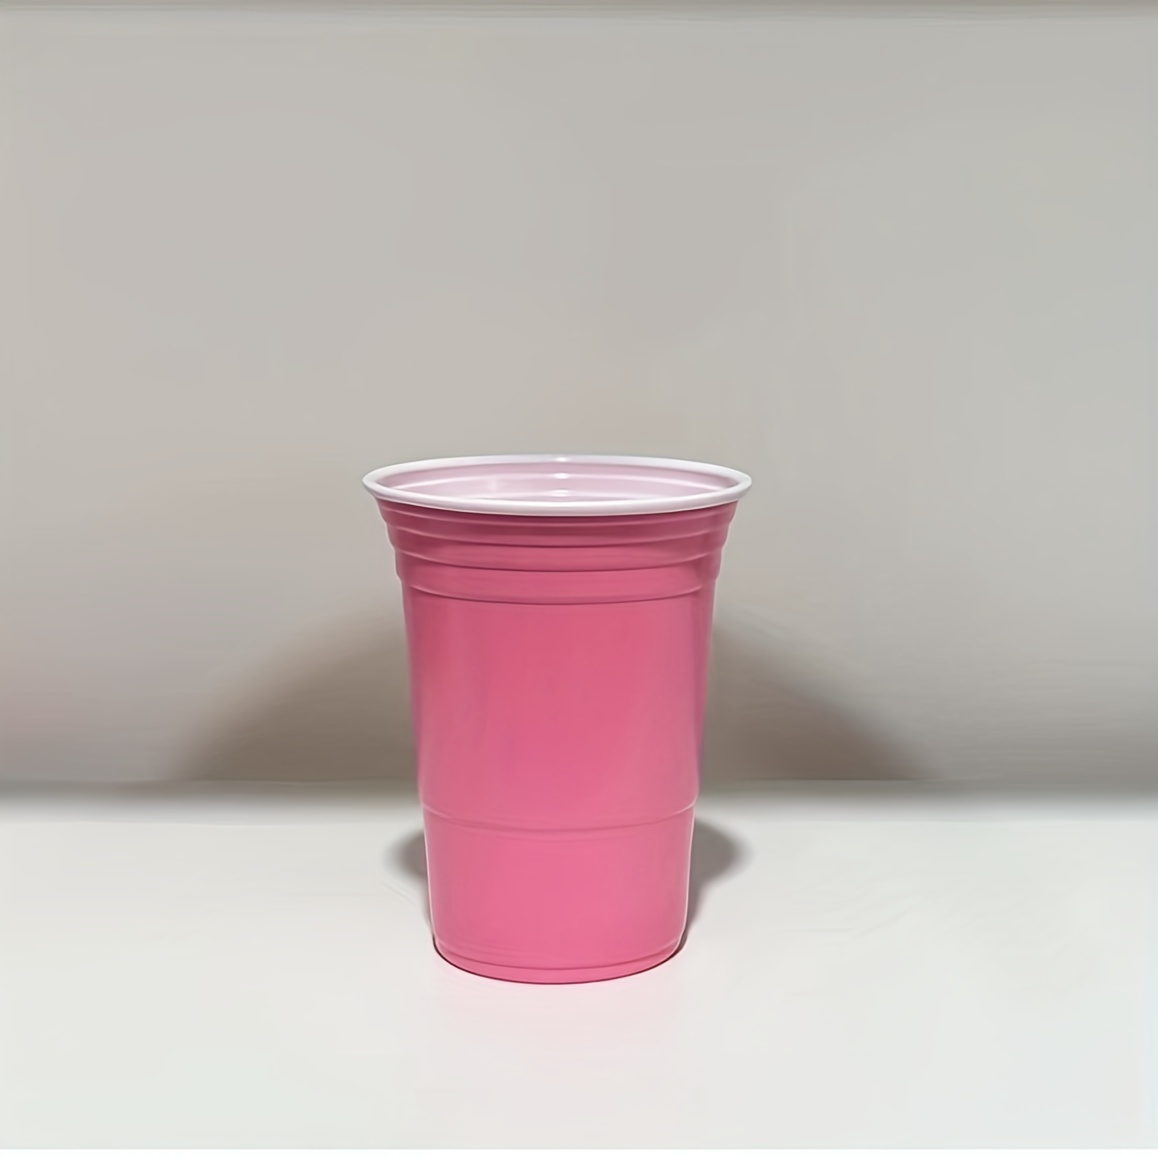 5oz x 25 Counts Disposable Clear Plastic Drinking Cups Pack Drinking Party  New